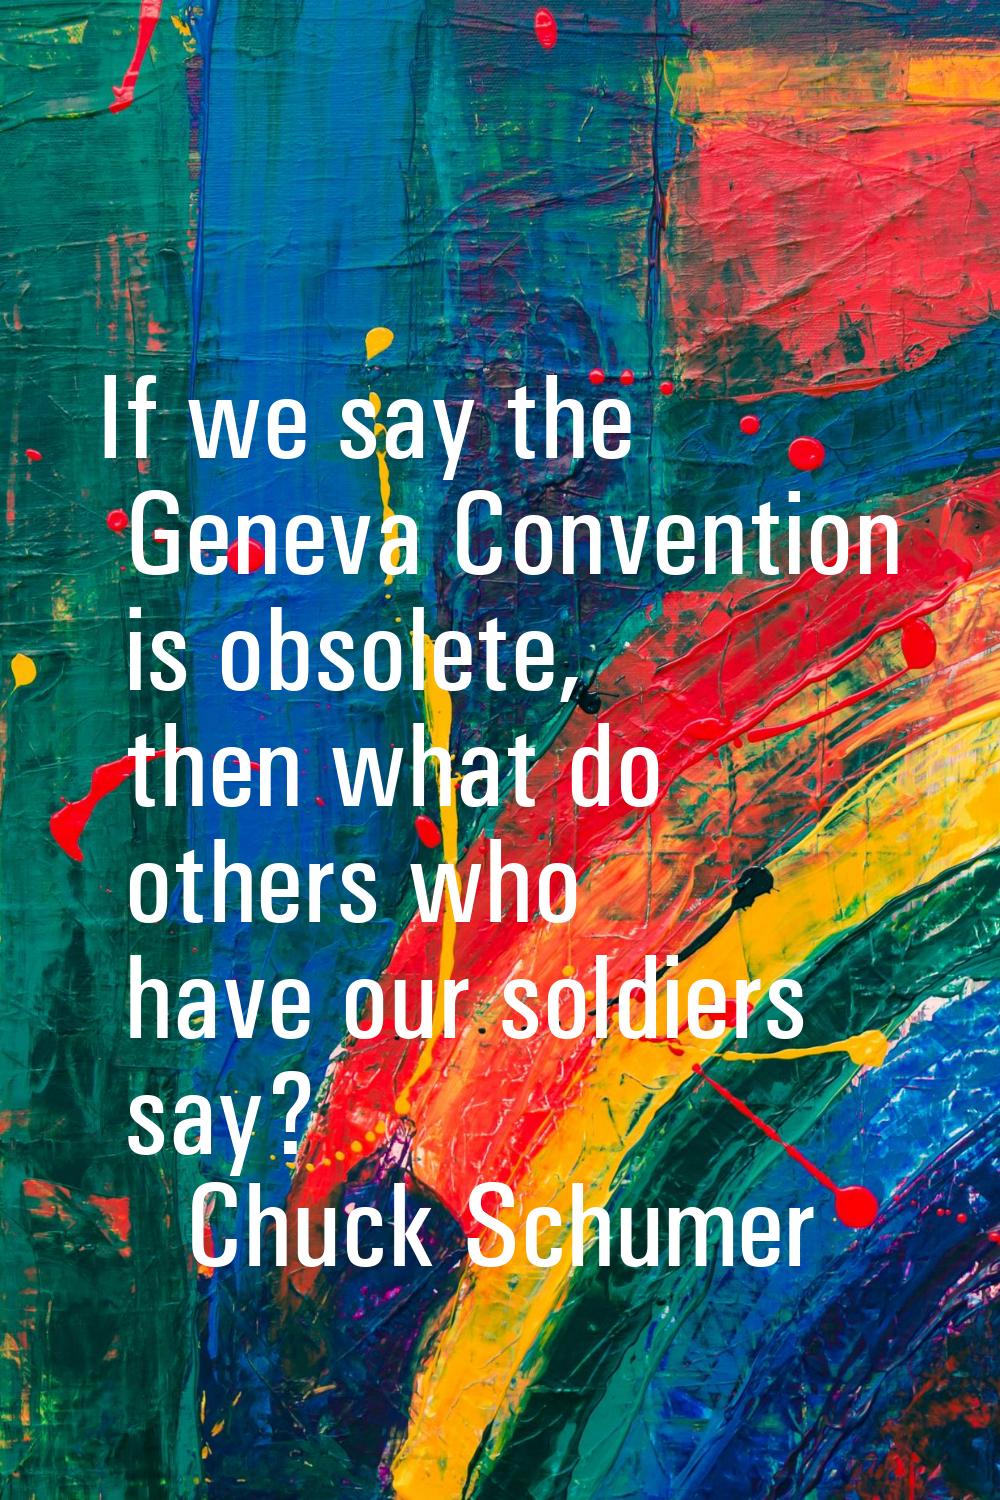 If we say the Geneva Convention is obsolete, then what do others who have our soldiers say?